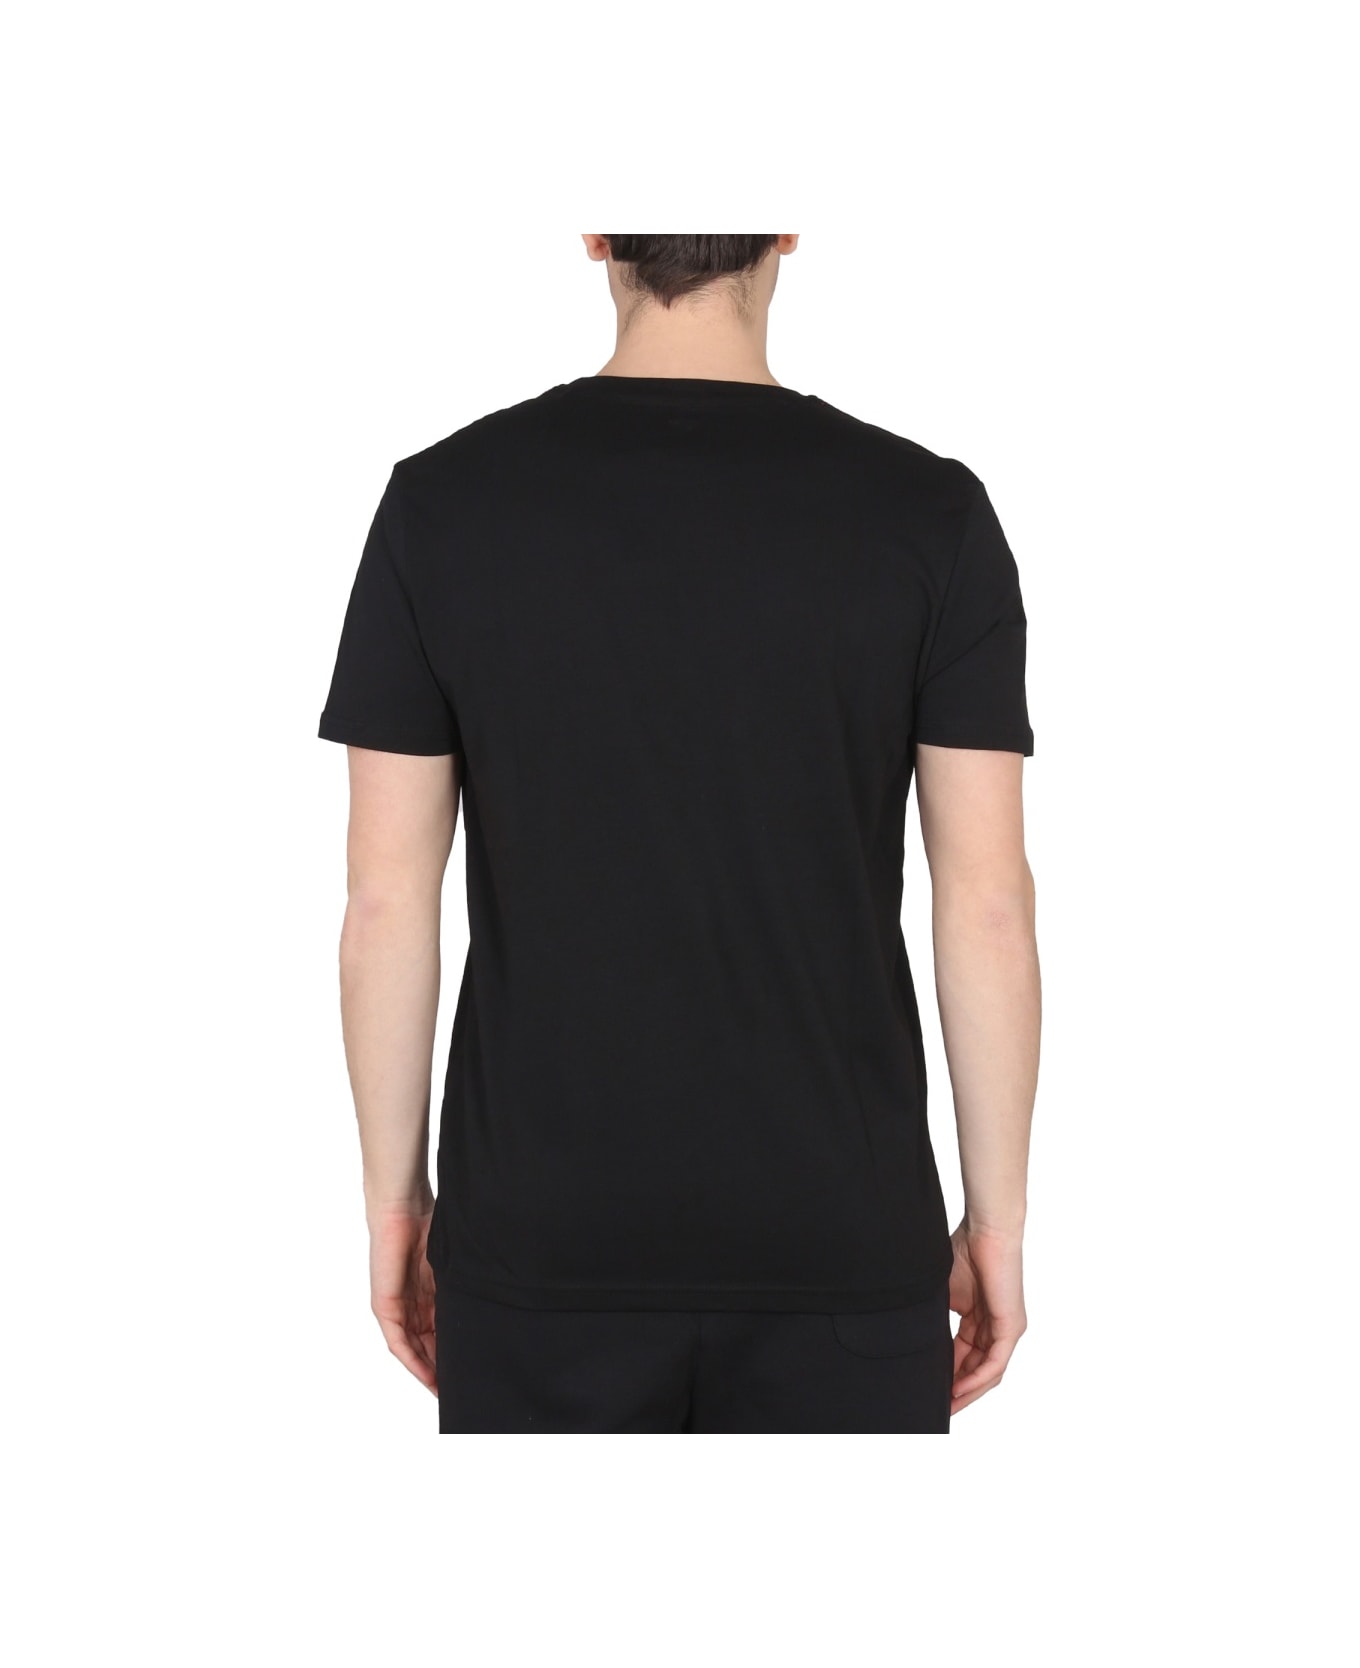 Alpha Industries Wolfhounds T-shirt - BLACK シャツ